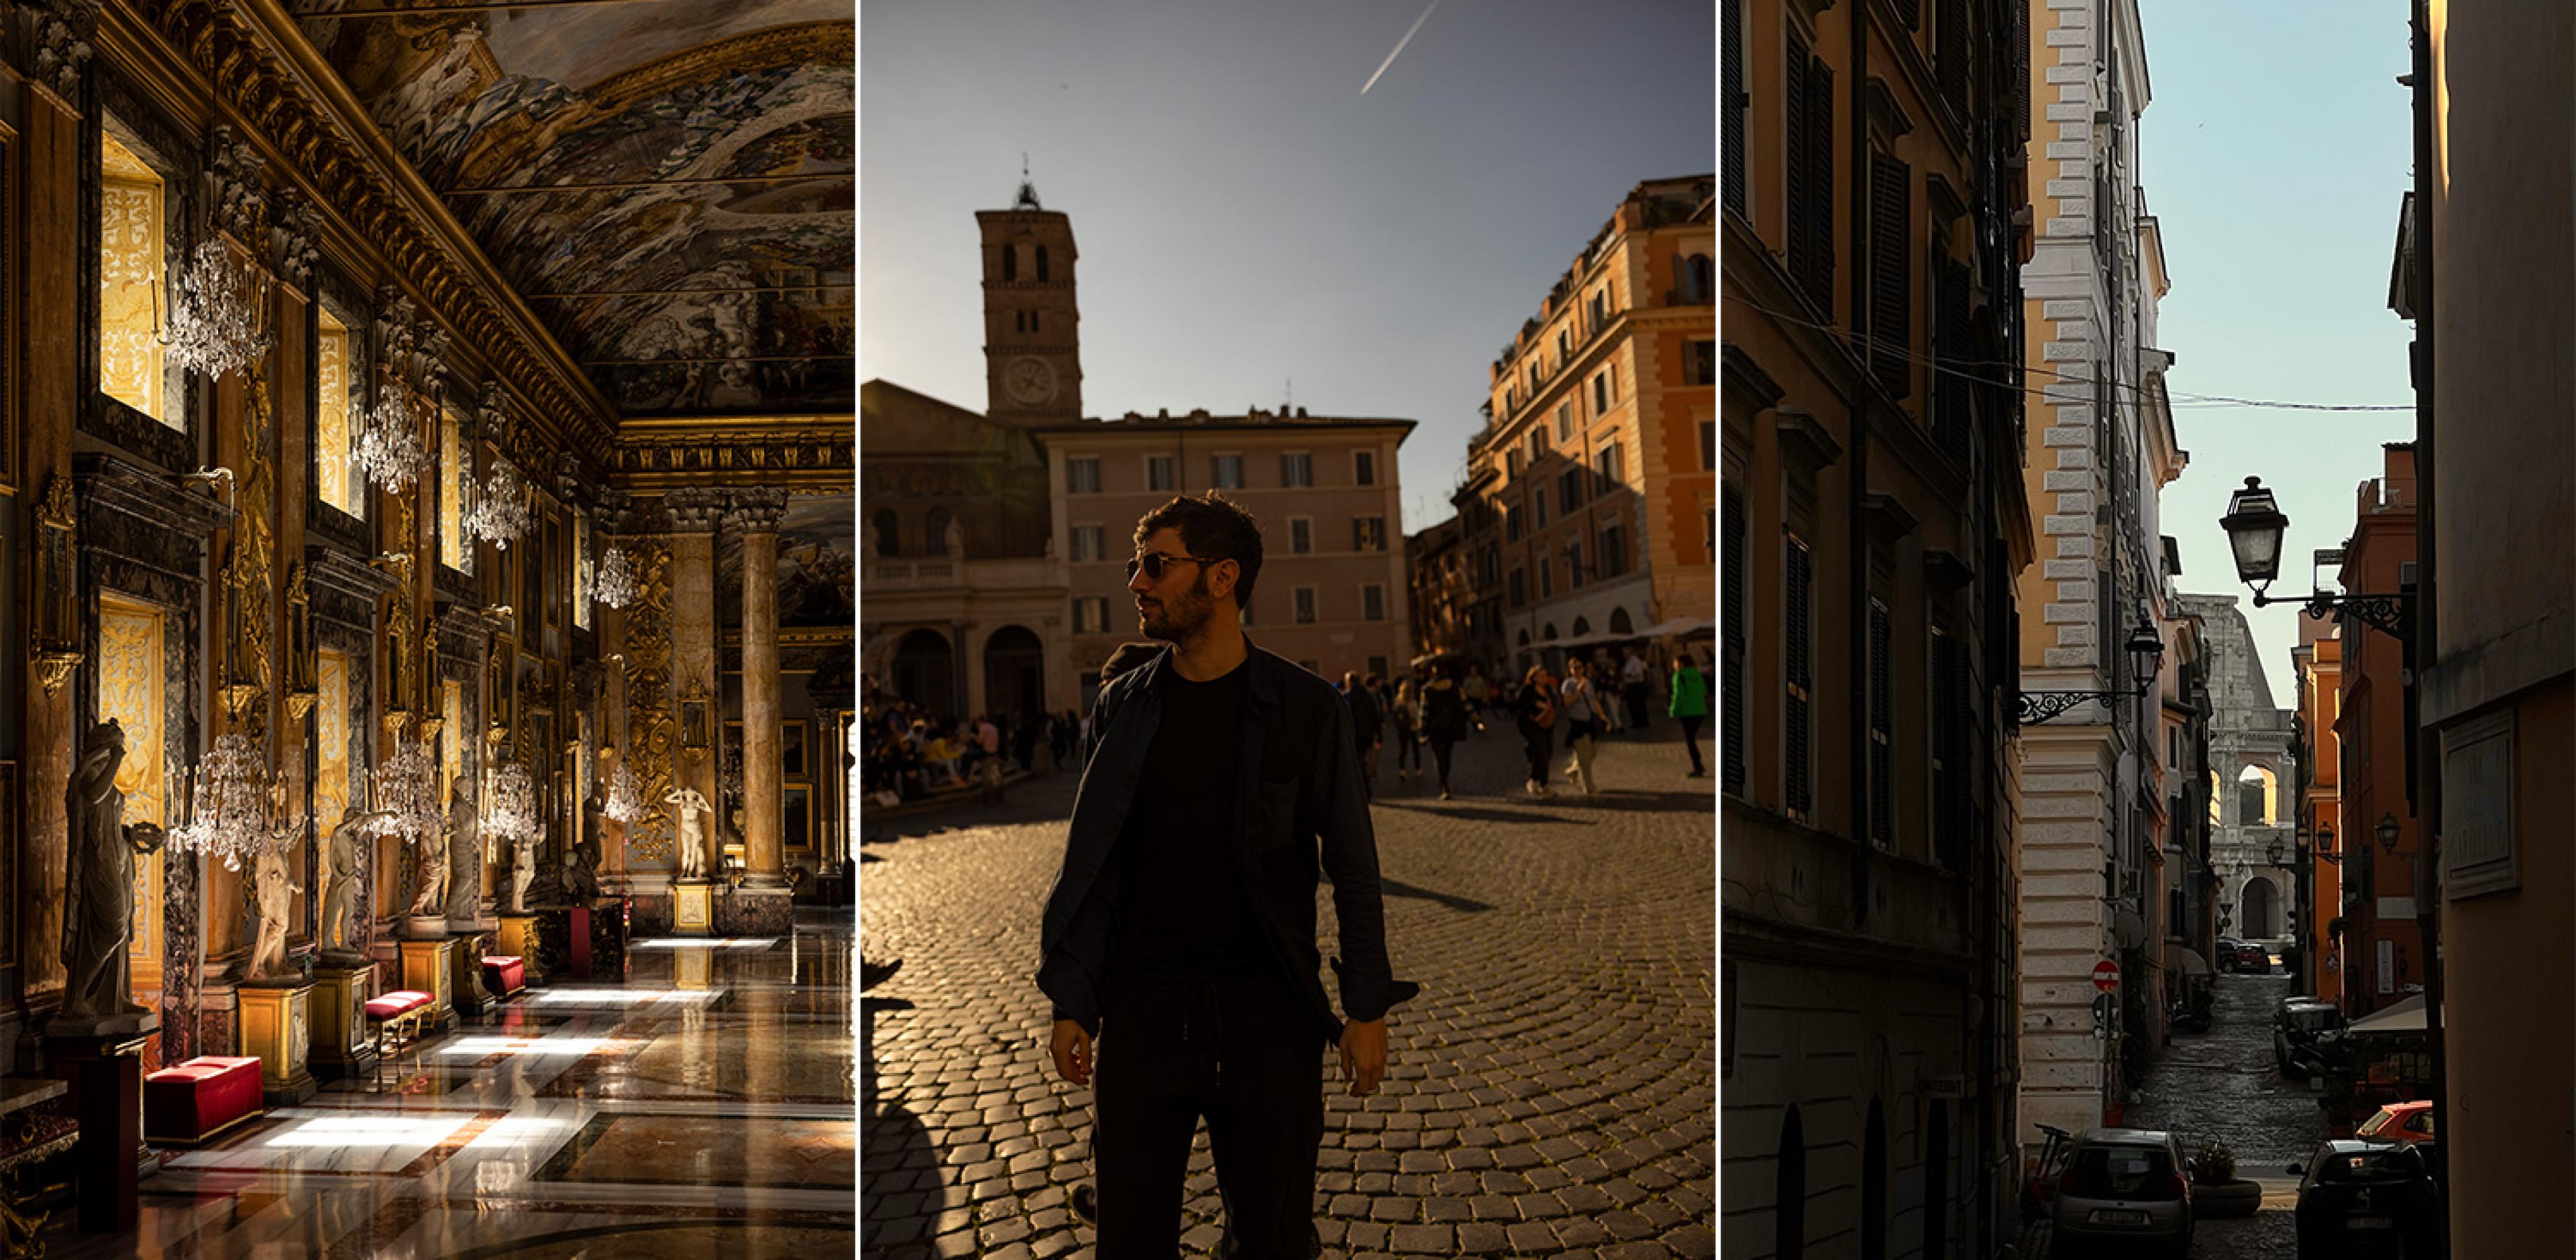 three images of rome: inside a palazzo's grand hall; a man in a square; and a view of the colosseum through the streets